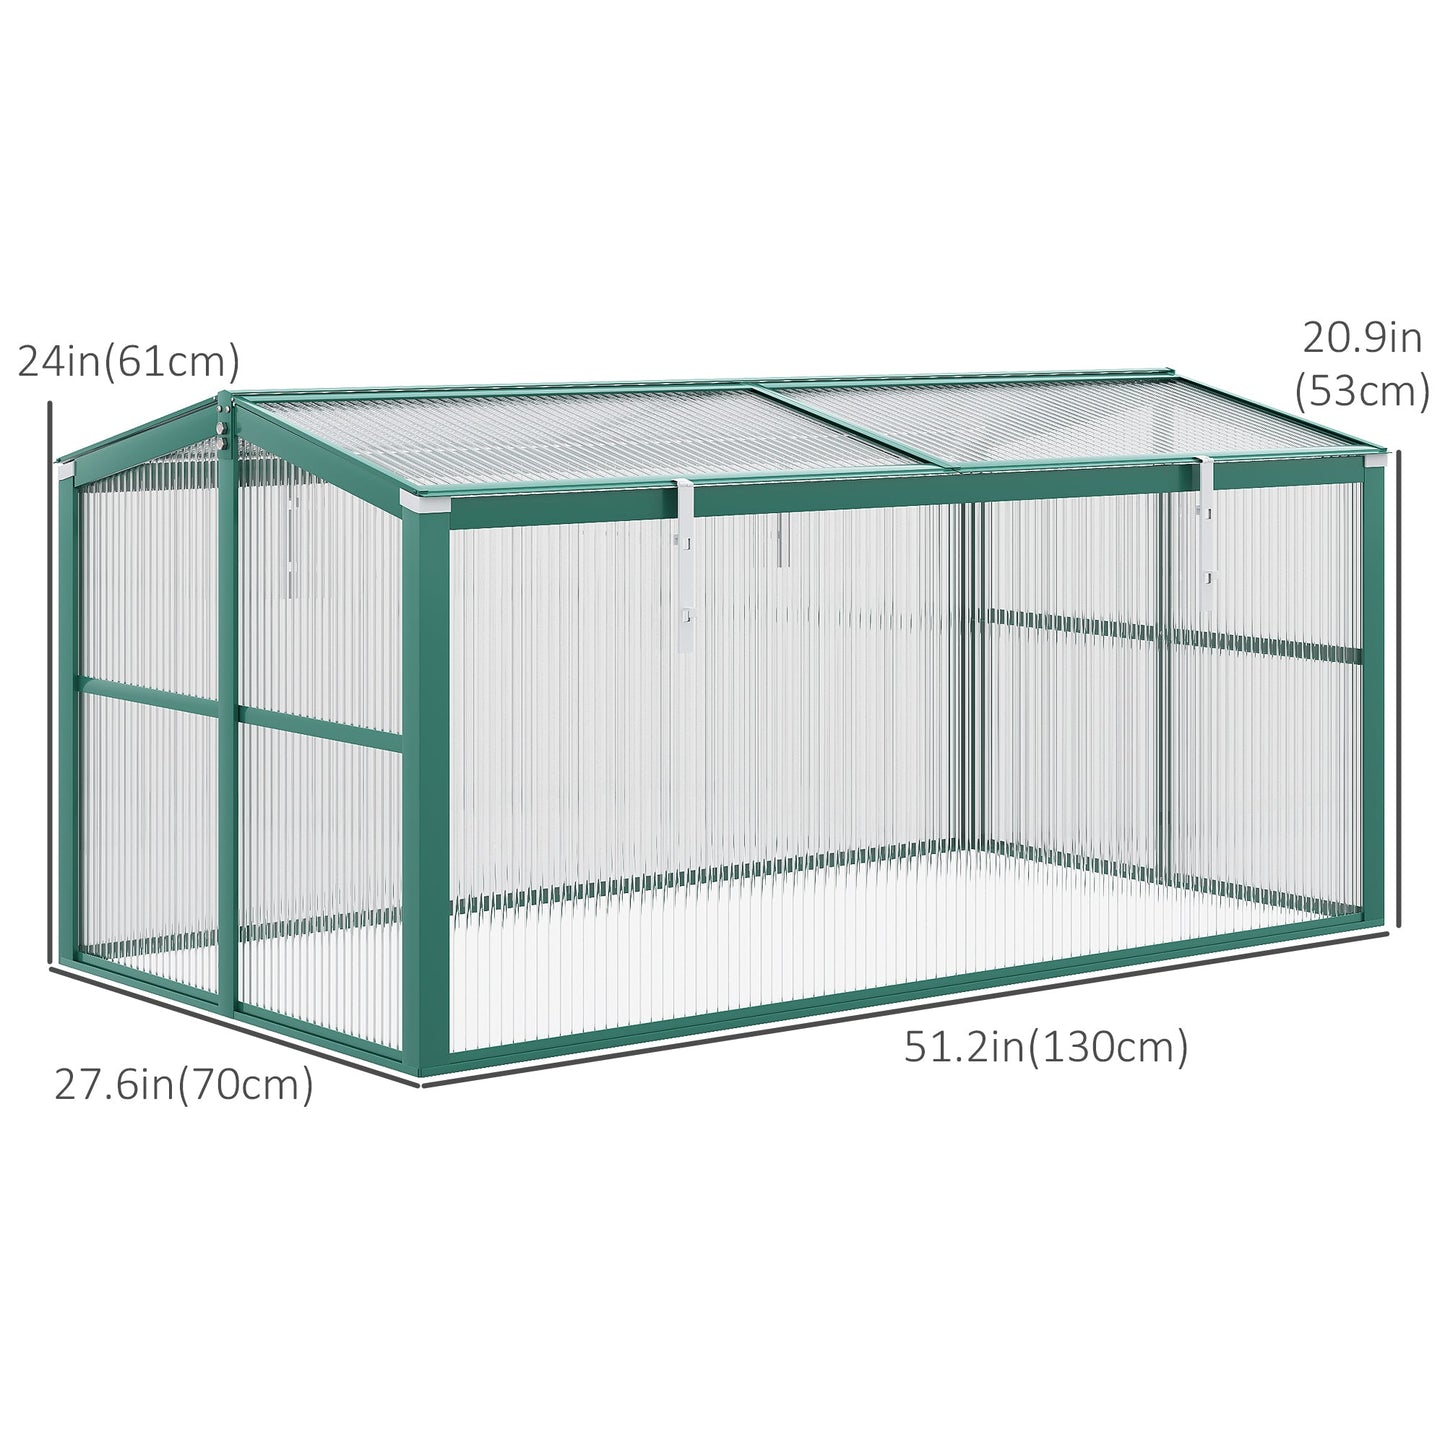 Aluminium Cold Frame Greenhouse Garden Portable Raised Planter with Openable Top, 51" x 28" x 24" at Gallery Canada